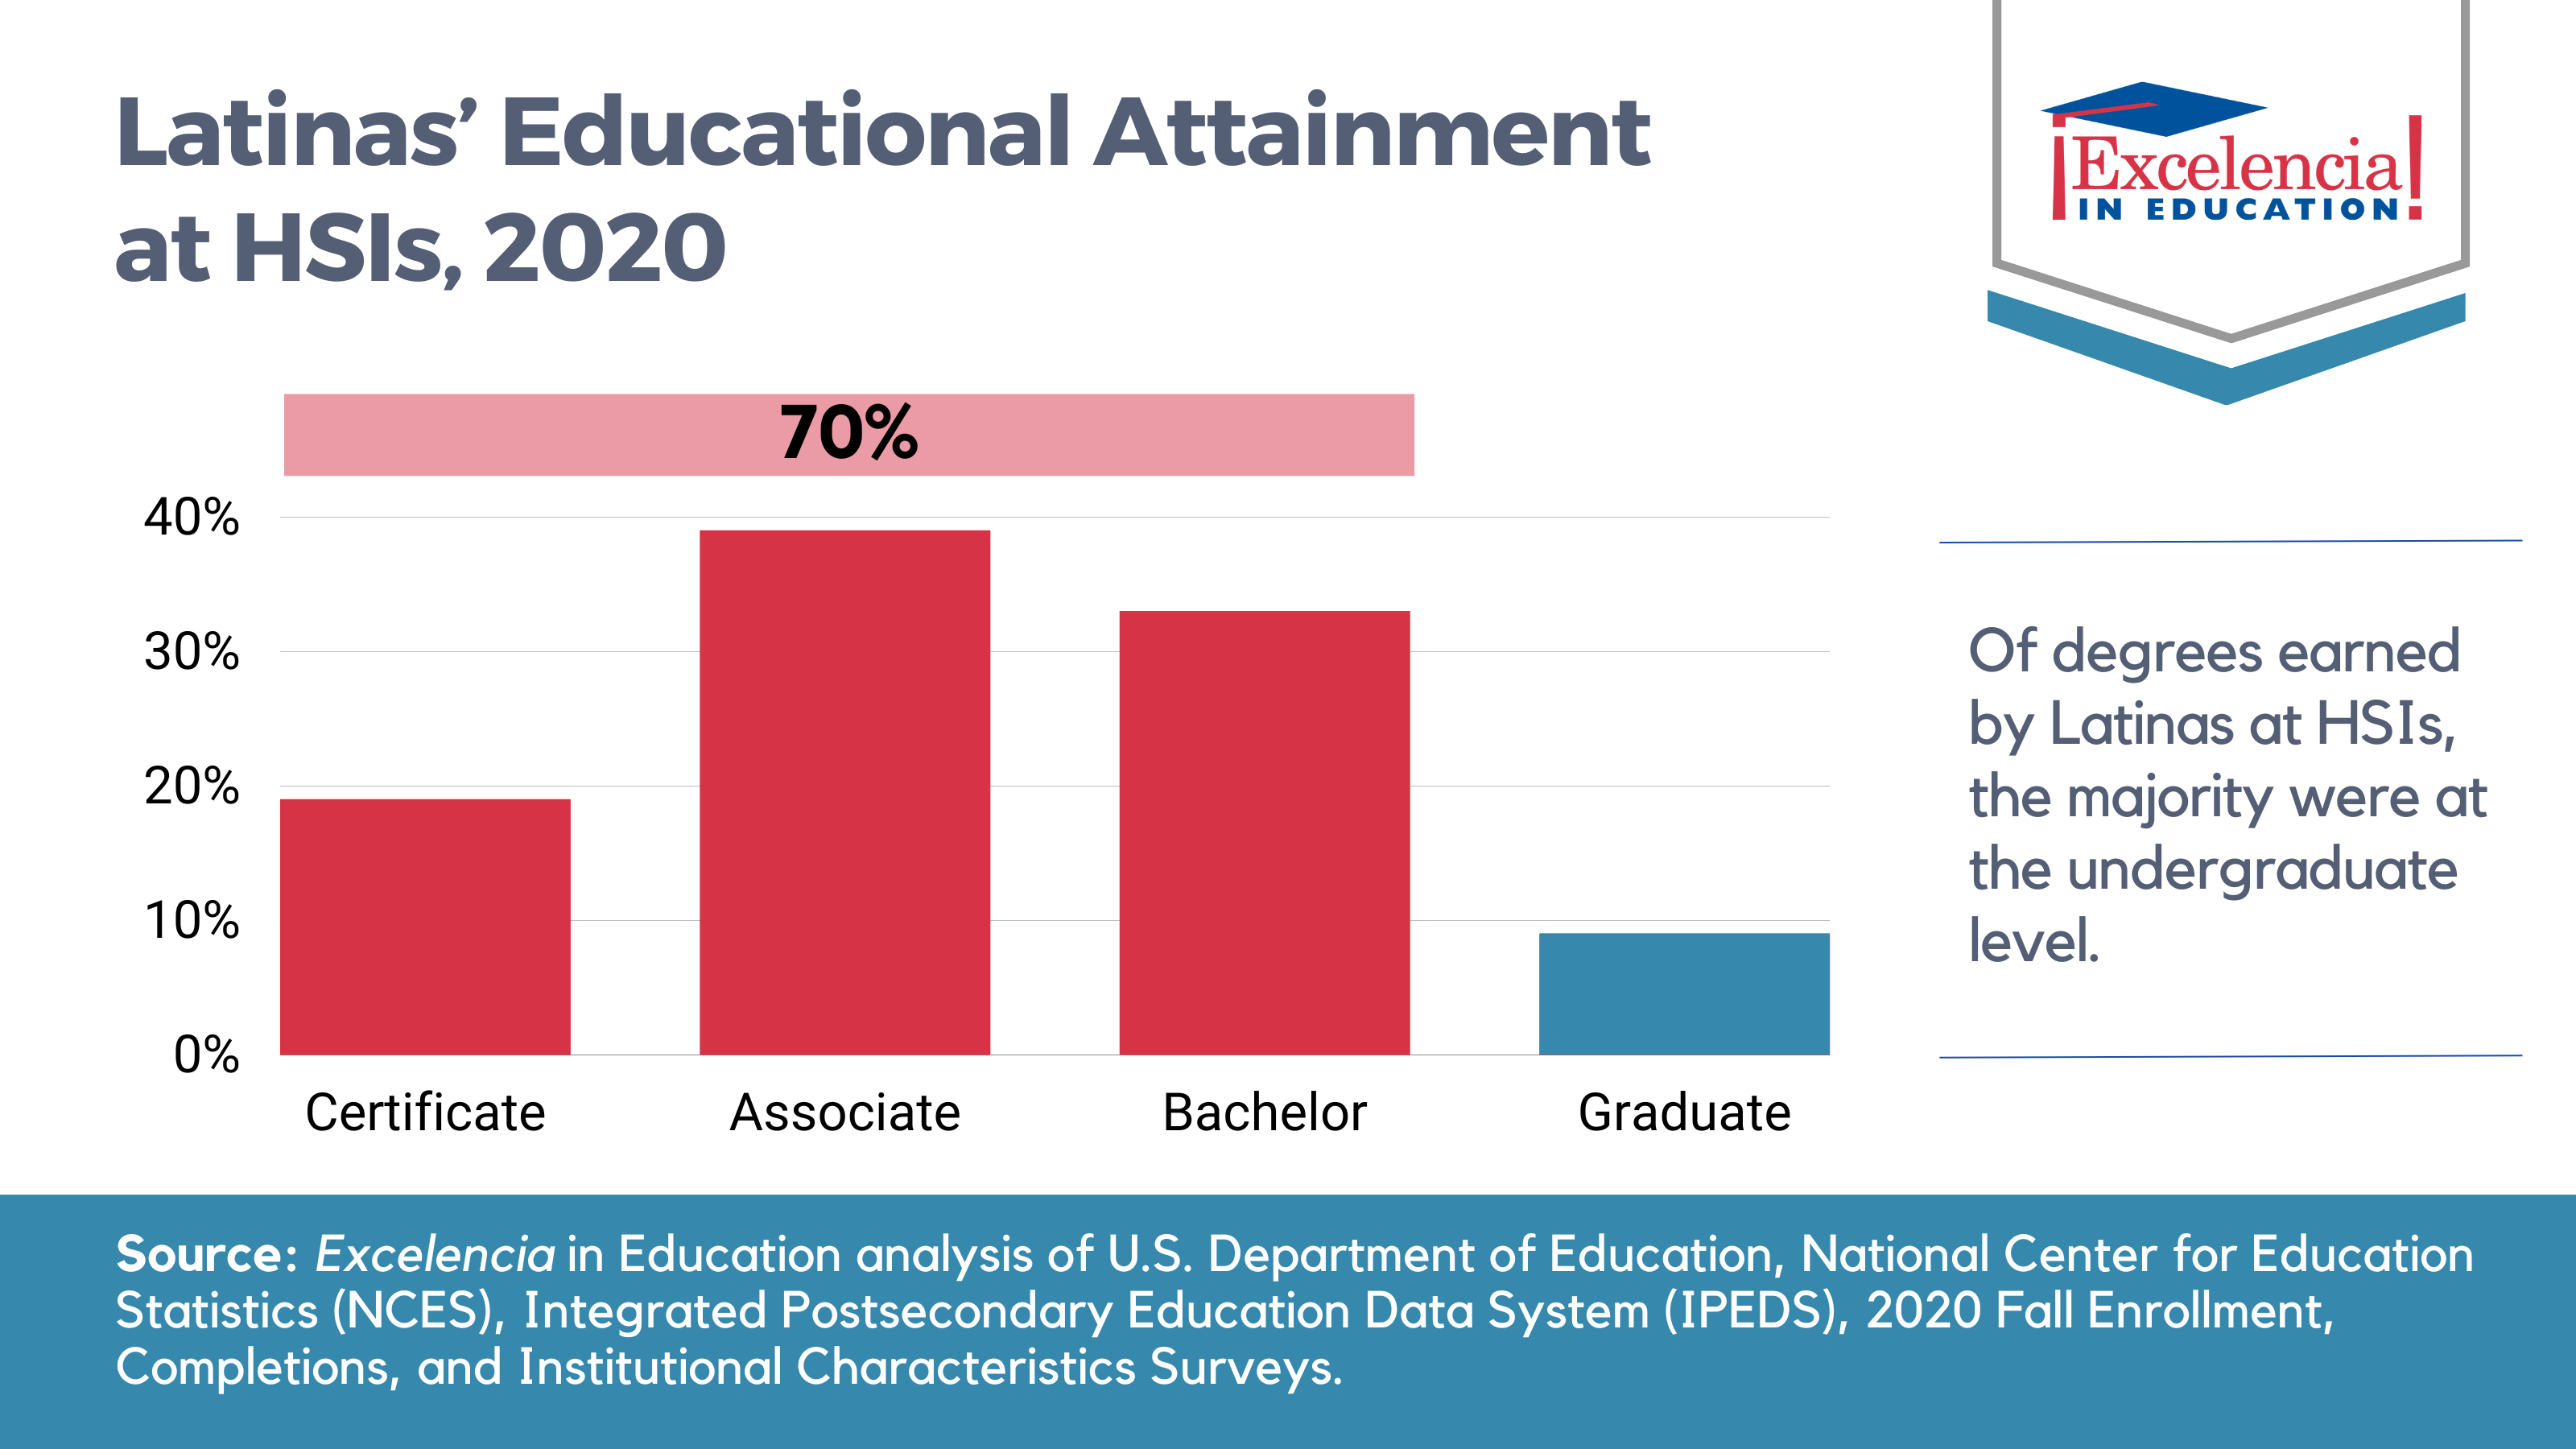 Infographic-Latinas’ Educational Attainment at HSIs, 2020